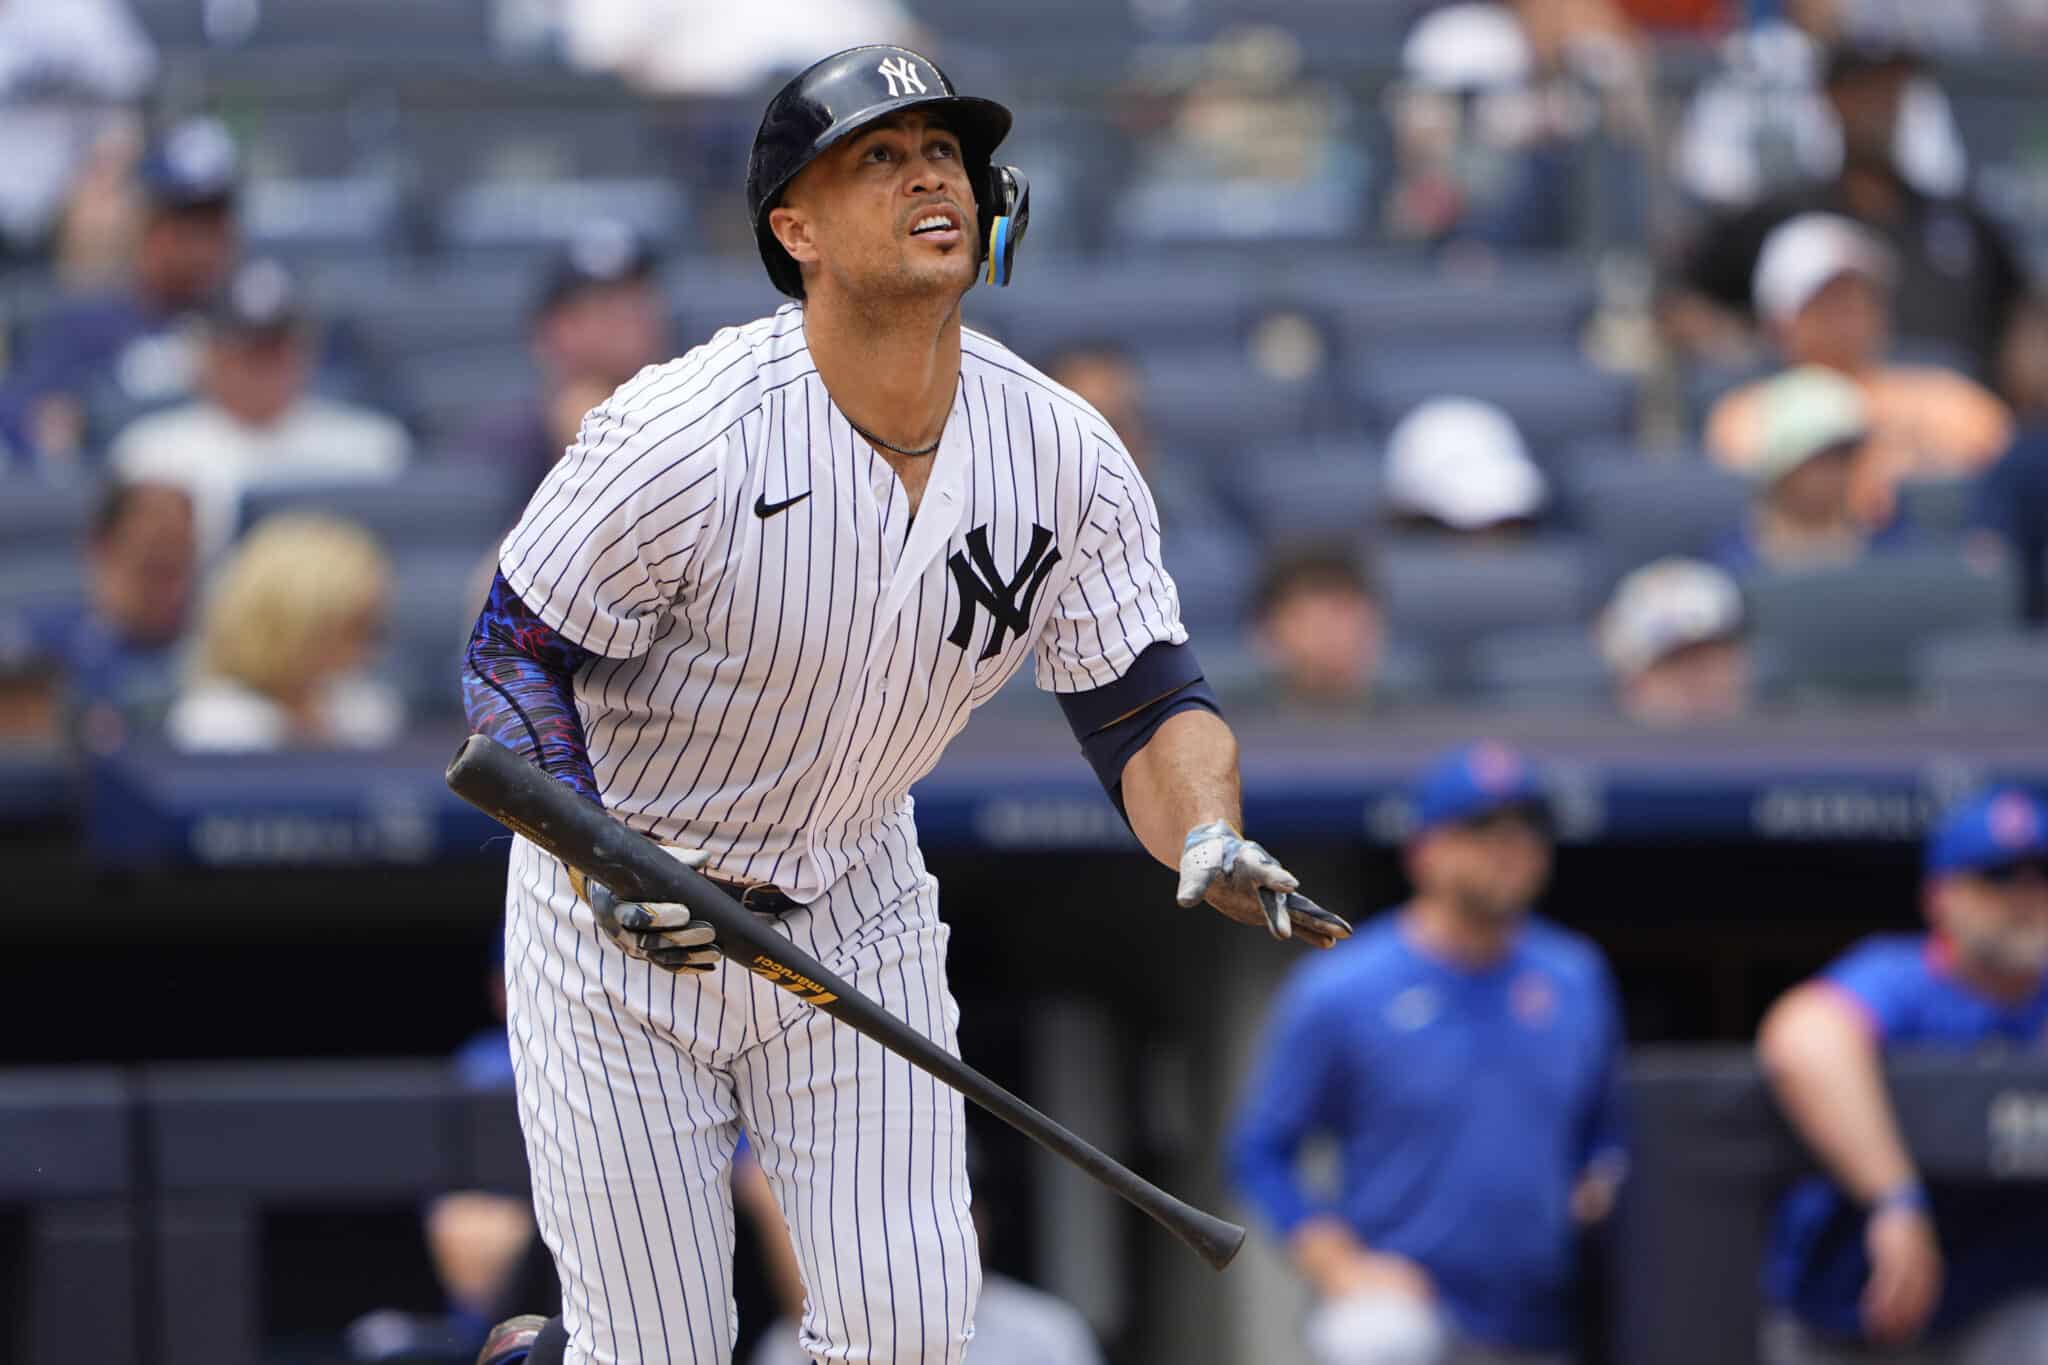 Is Yankees slugger Giancarlo Stanton helping to destroy sports?